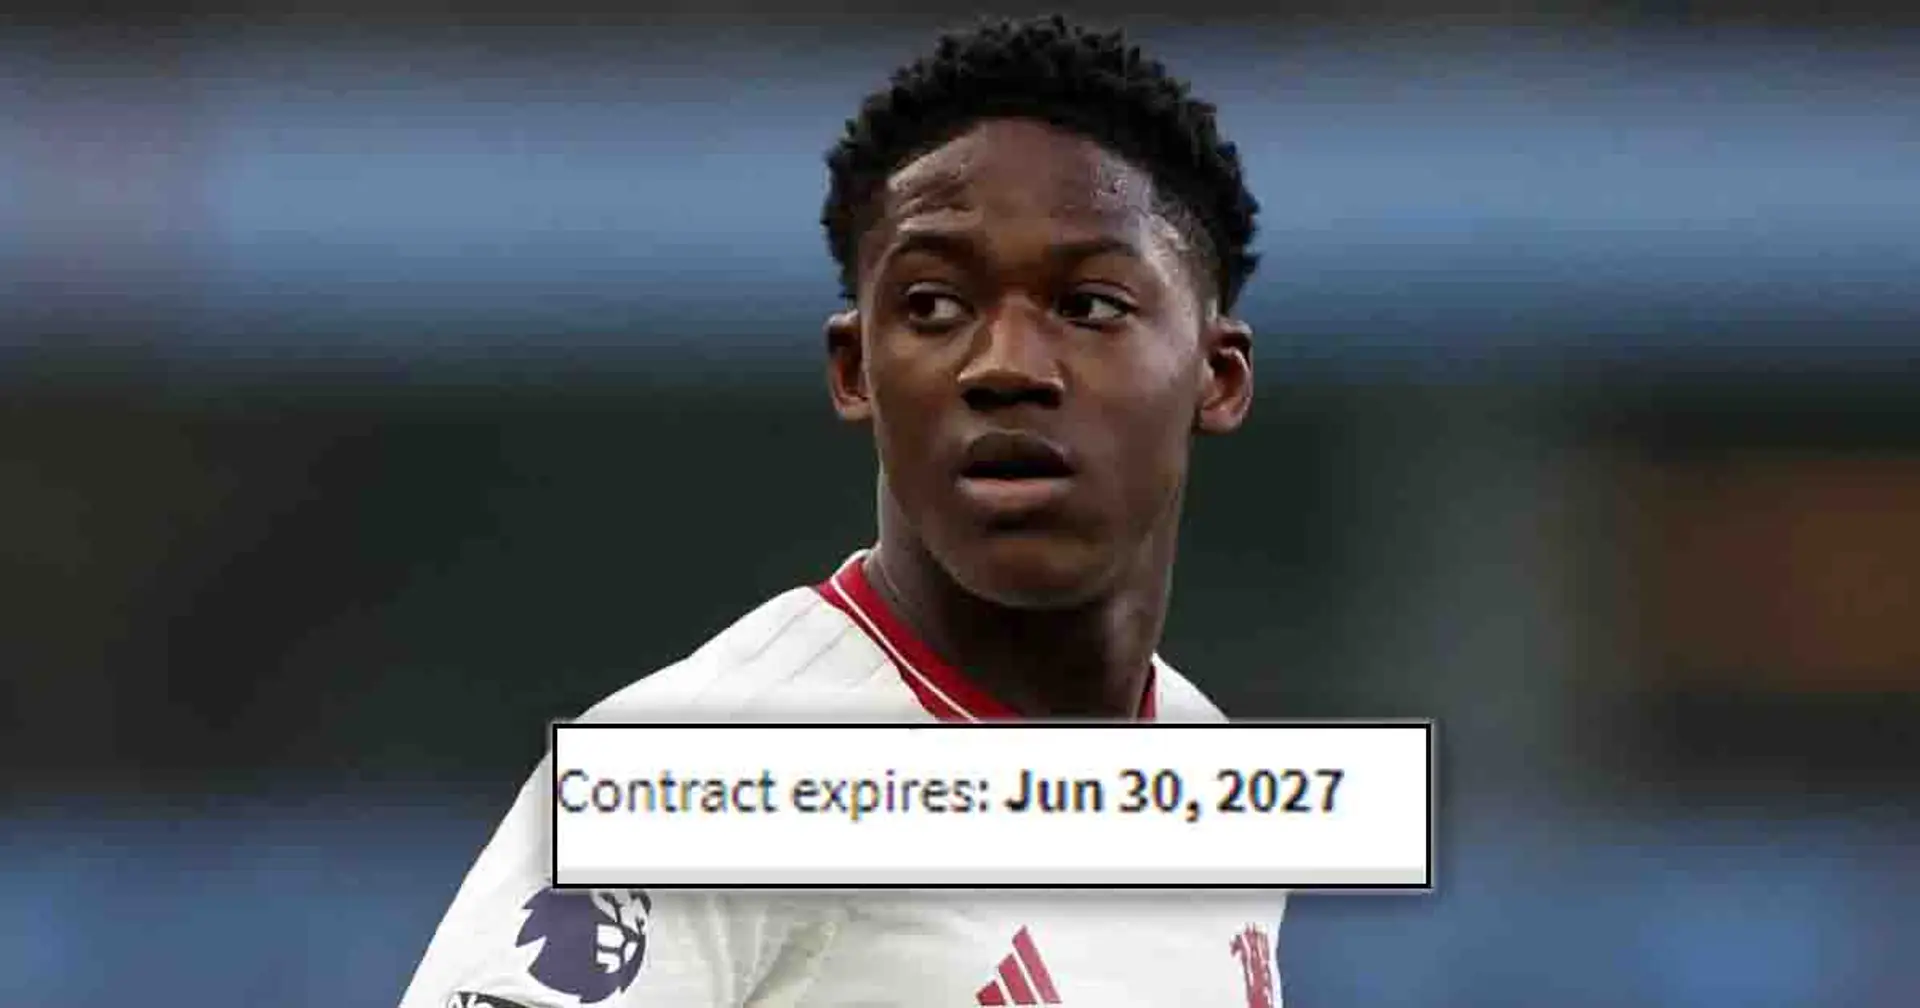 Revealed: Man United's stance on Kobbie Mainoo's contract as Ineos eyes him as 'face' of future project